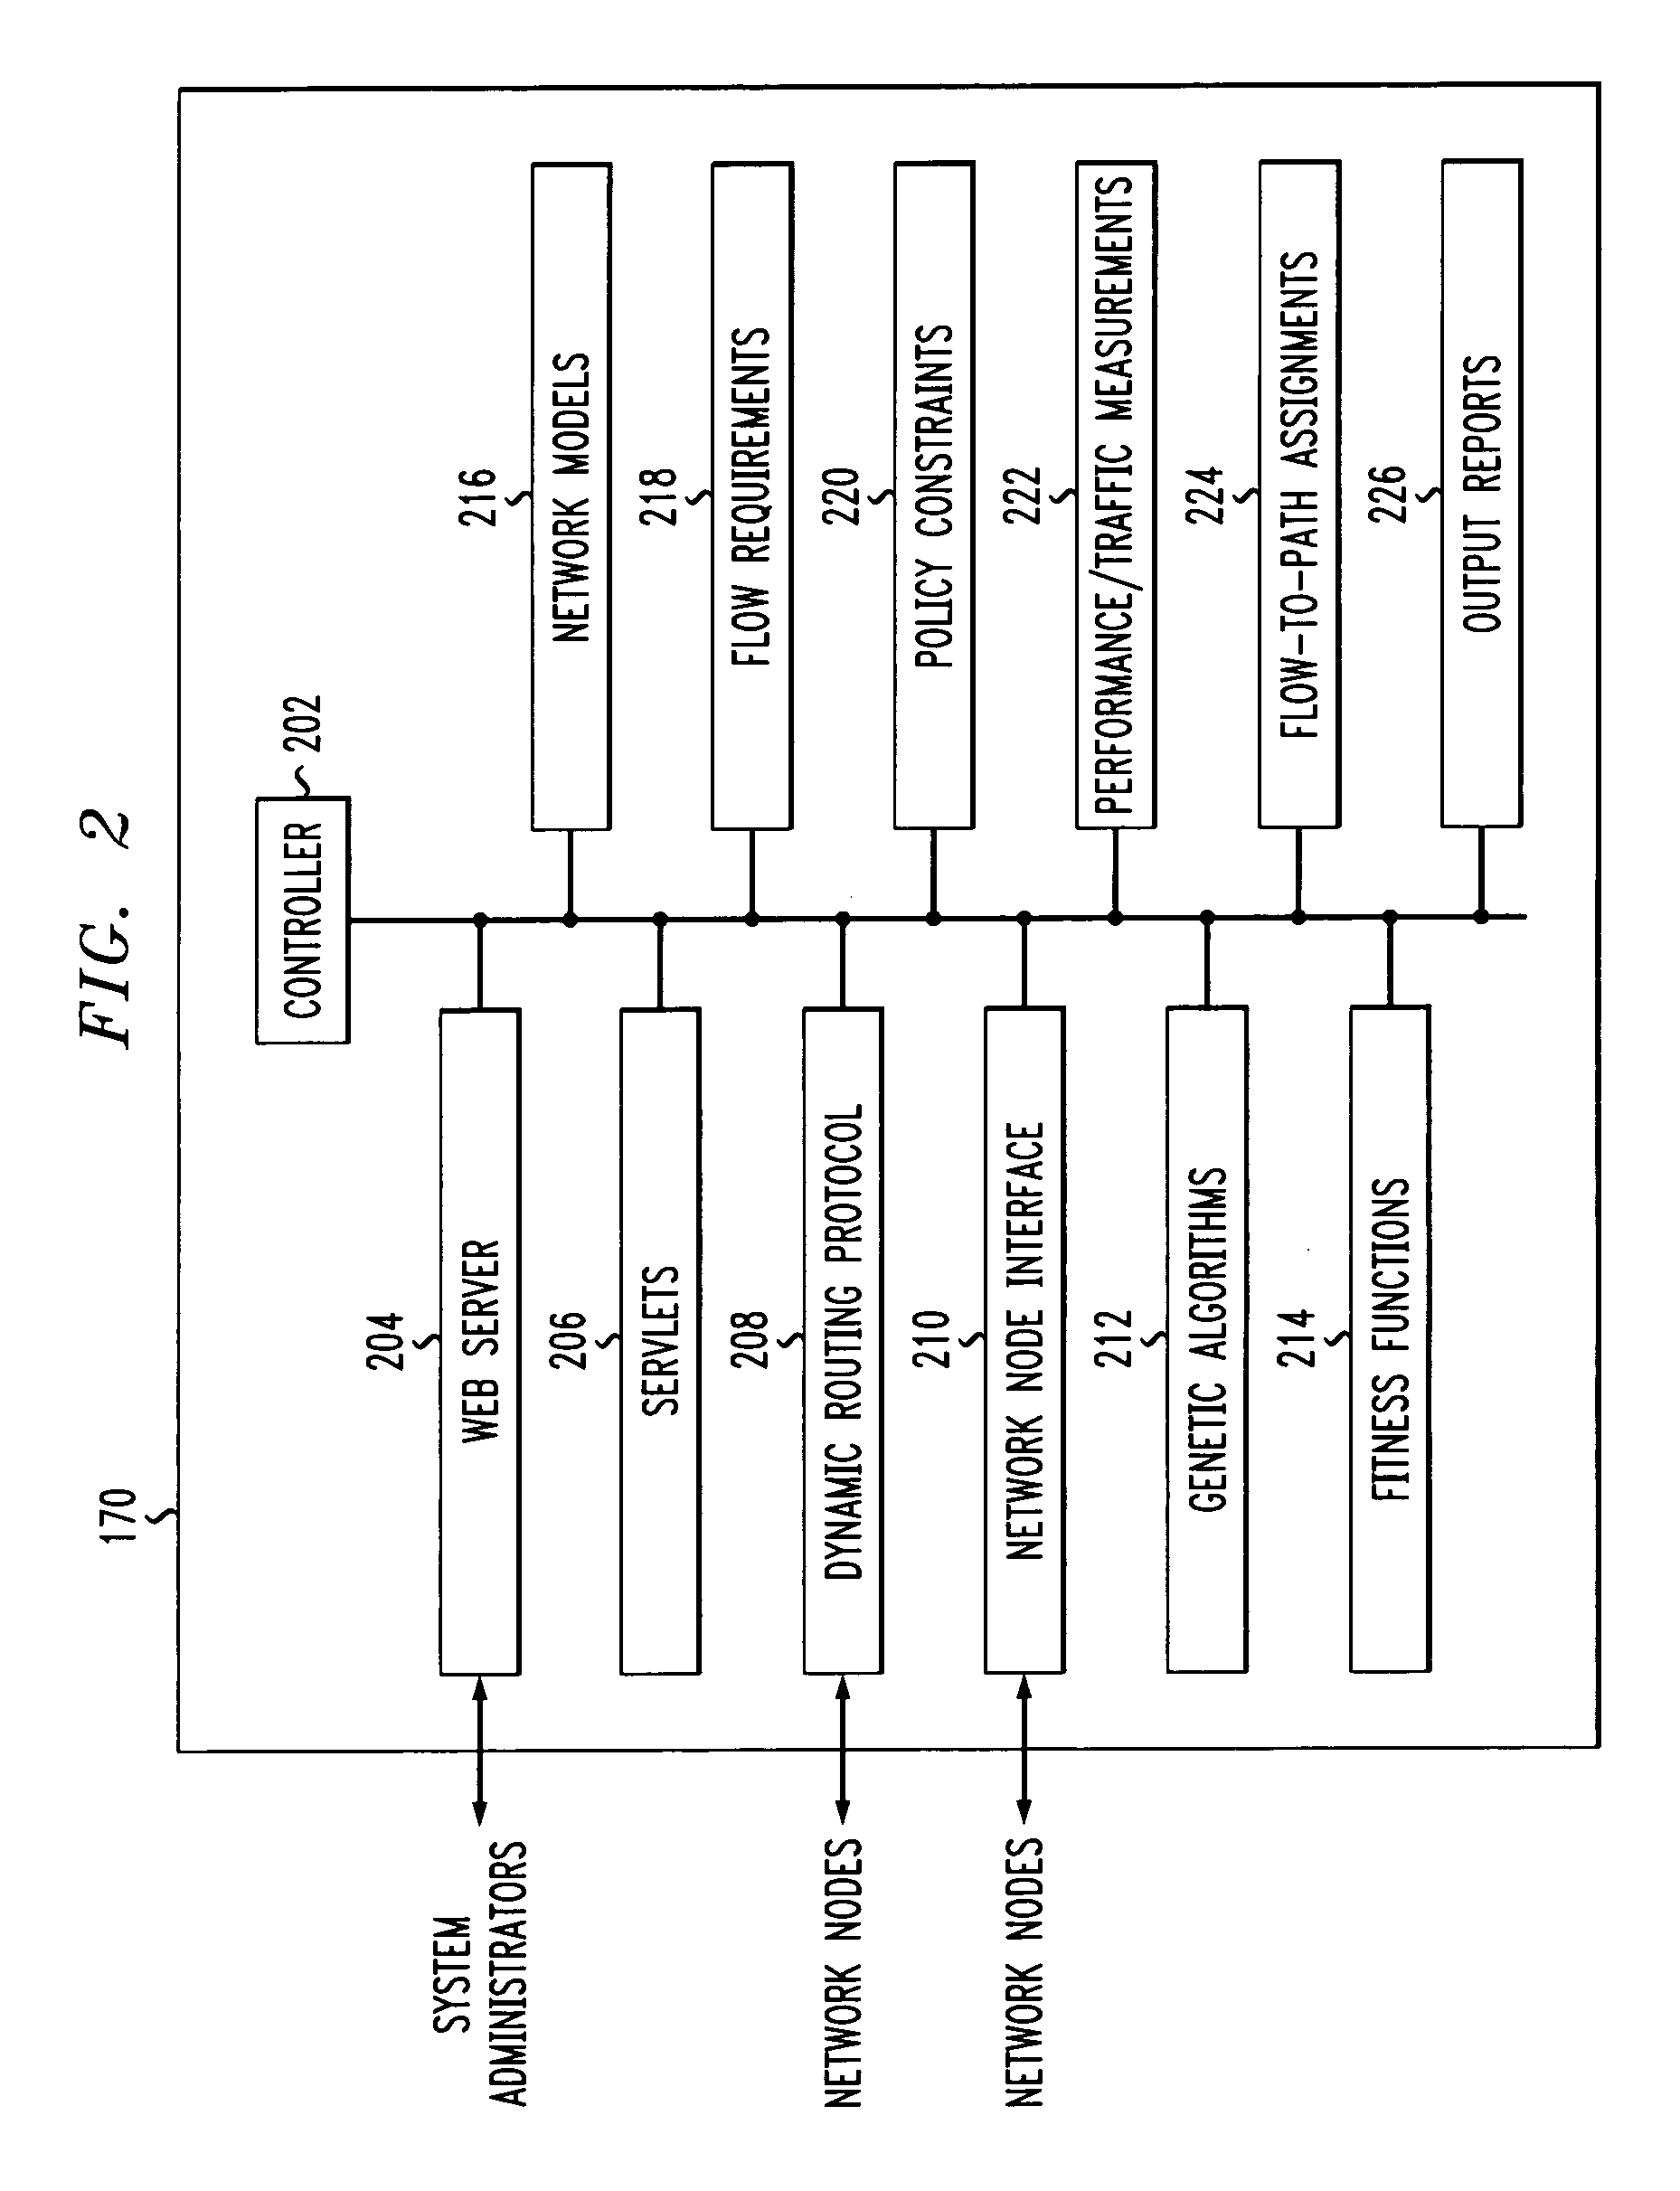 System for utilizing genetic algorithm to provide constraint-based routing of packets in a communication network